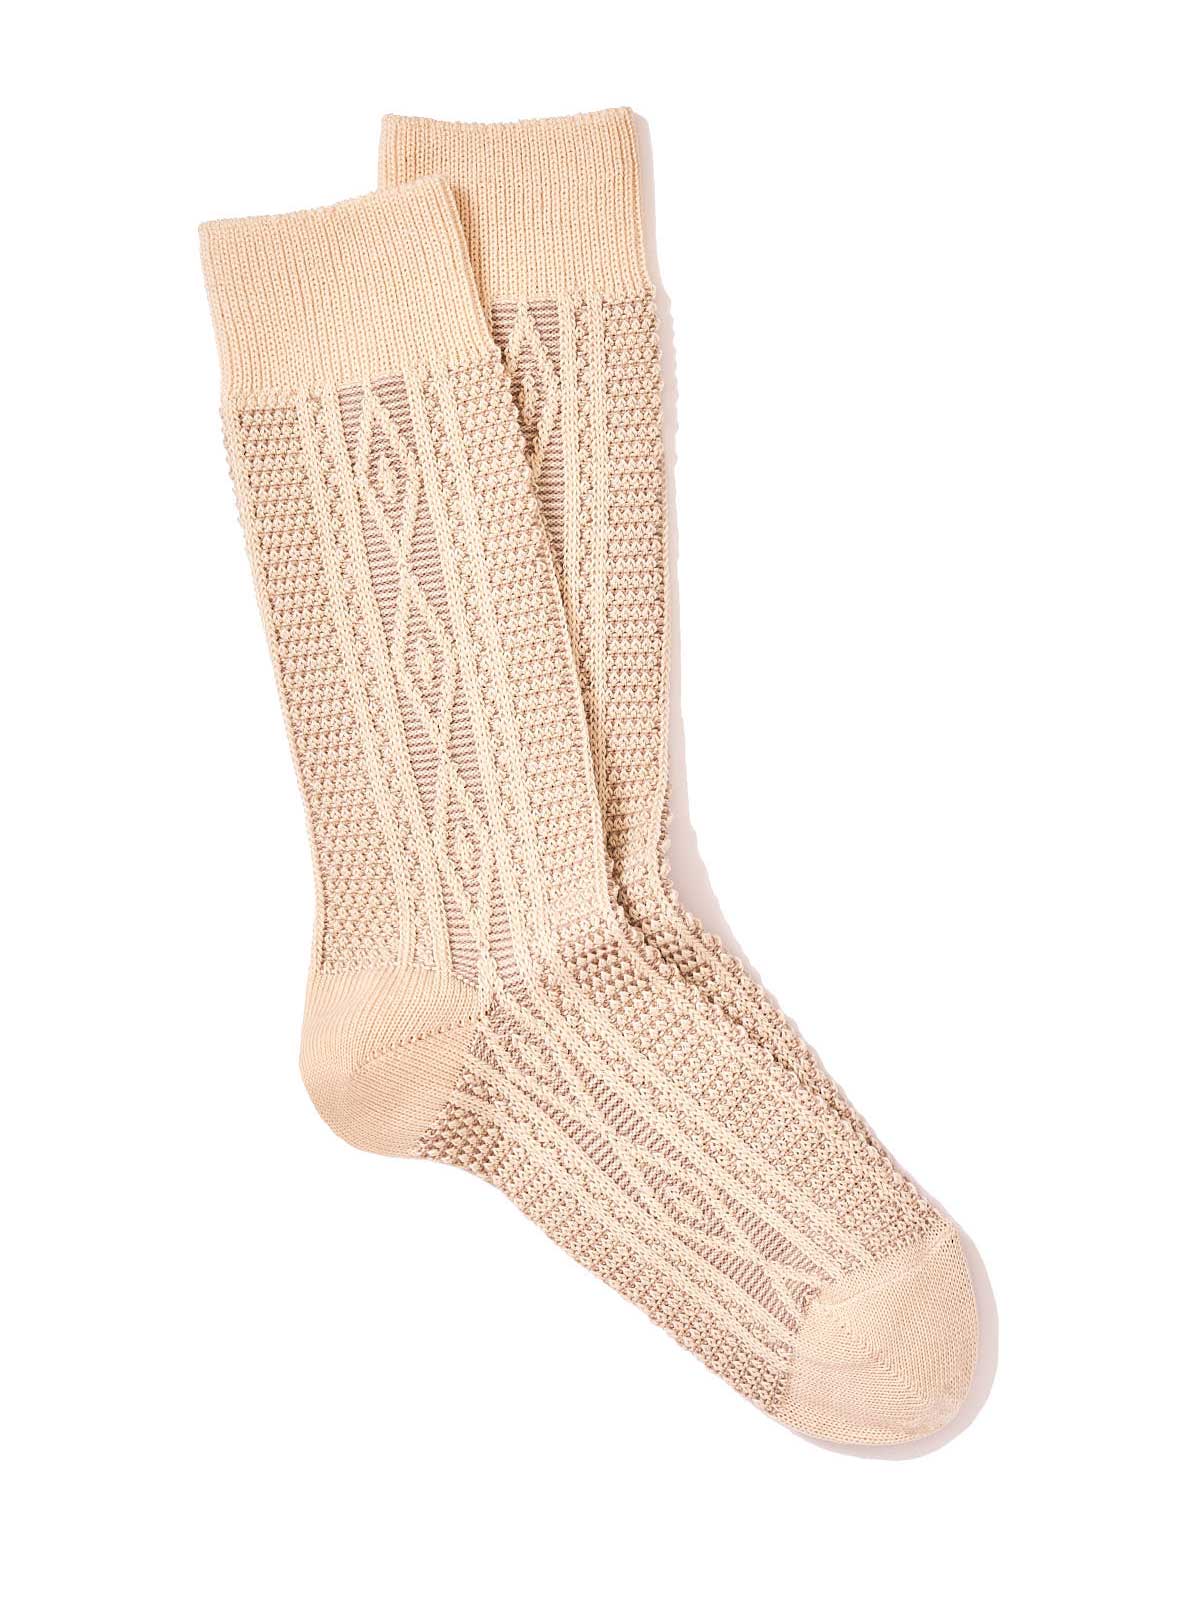 Chaussettes Aran Homme, ROYALTIES, made in France